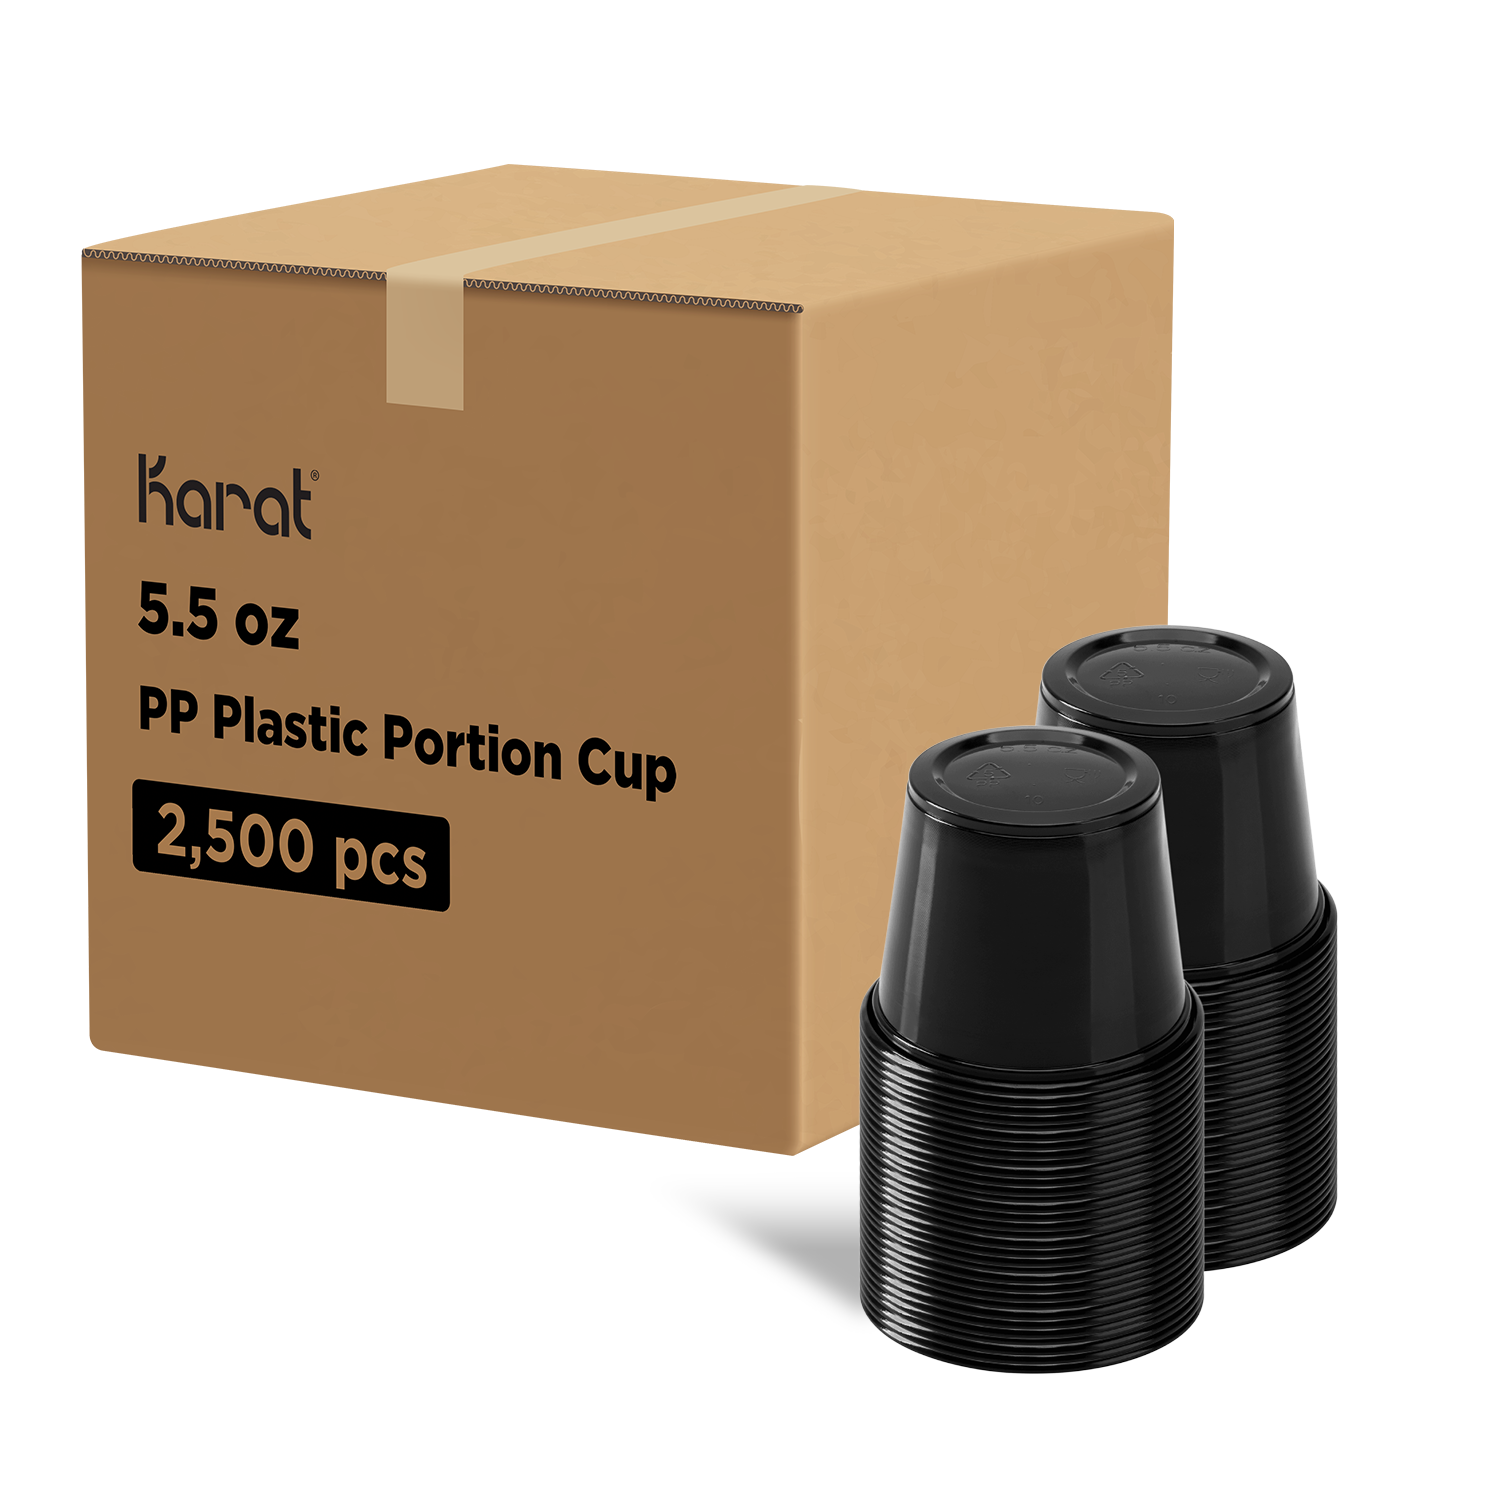 Karat 5.5 oz PP Plastic Portion Cups stacked next to packaging